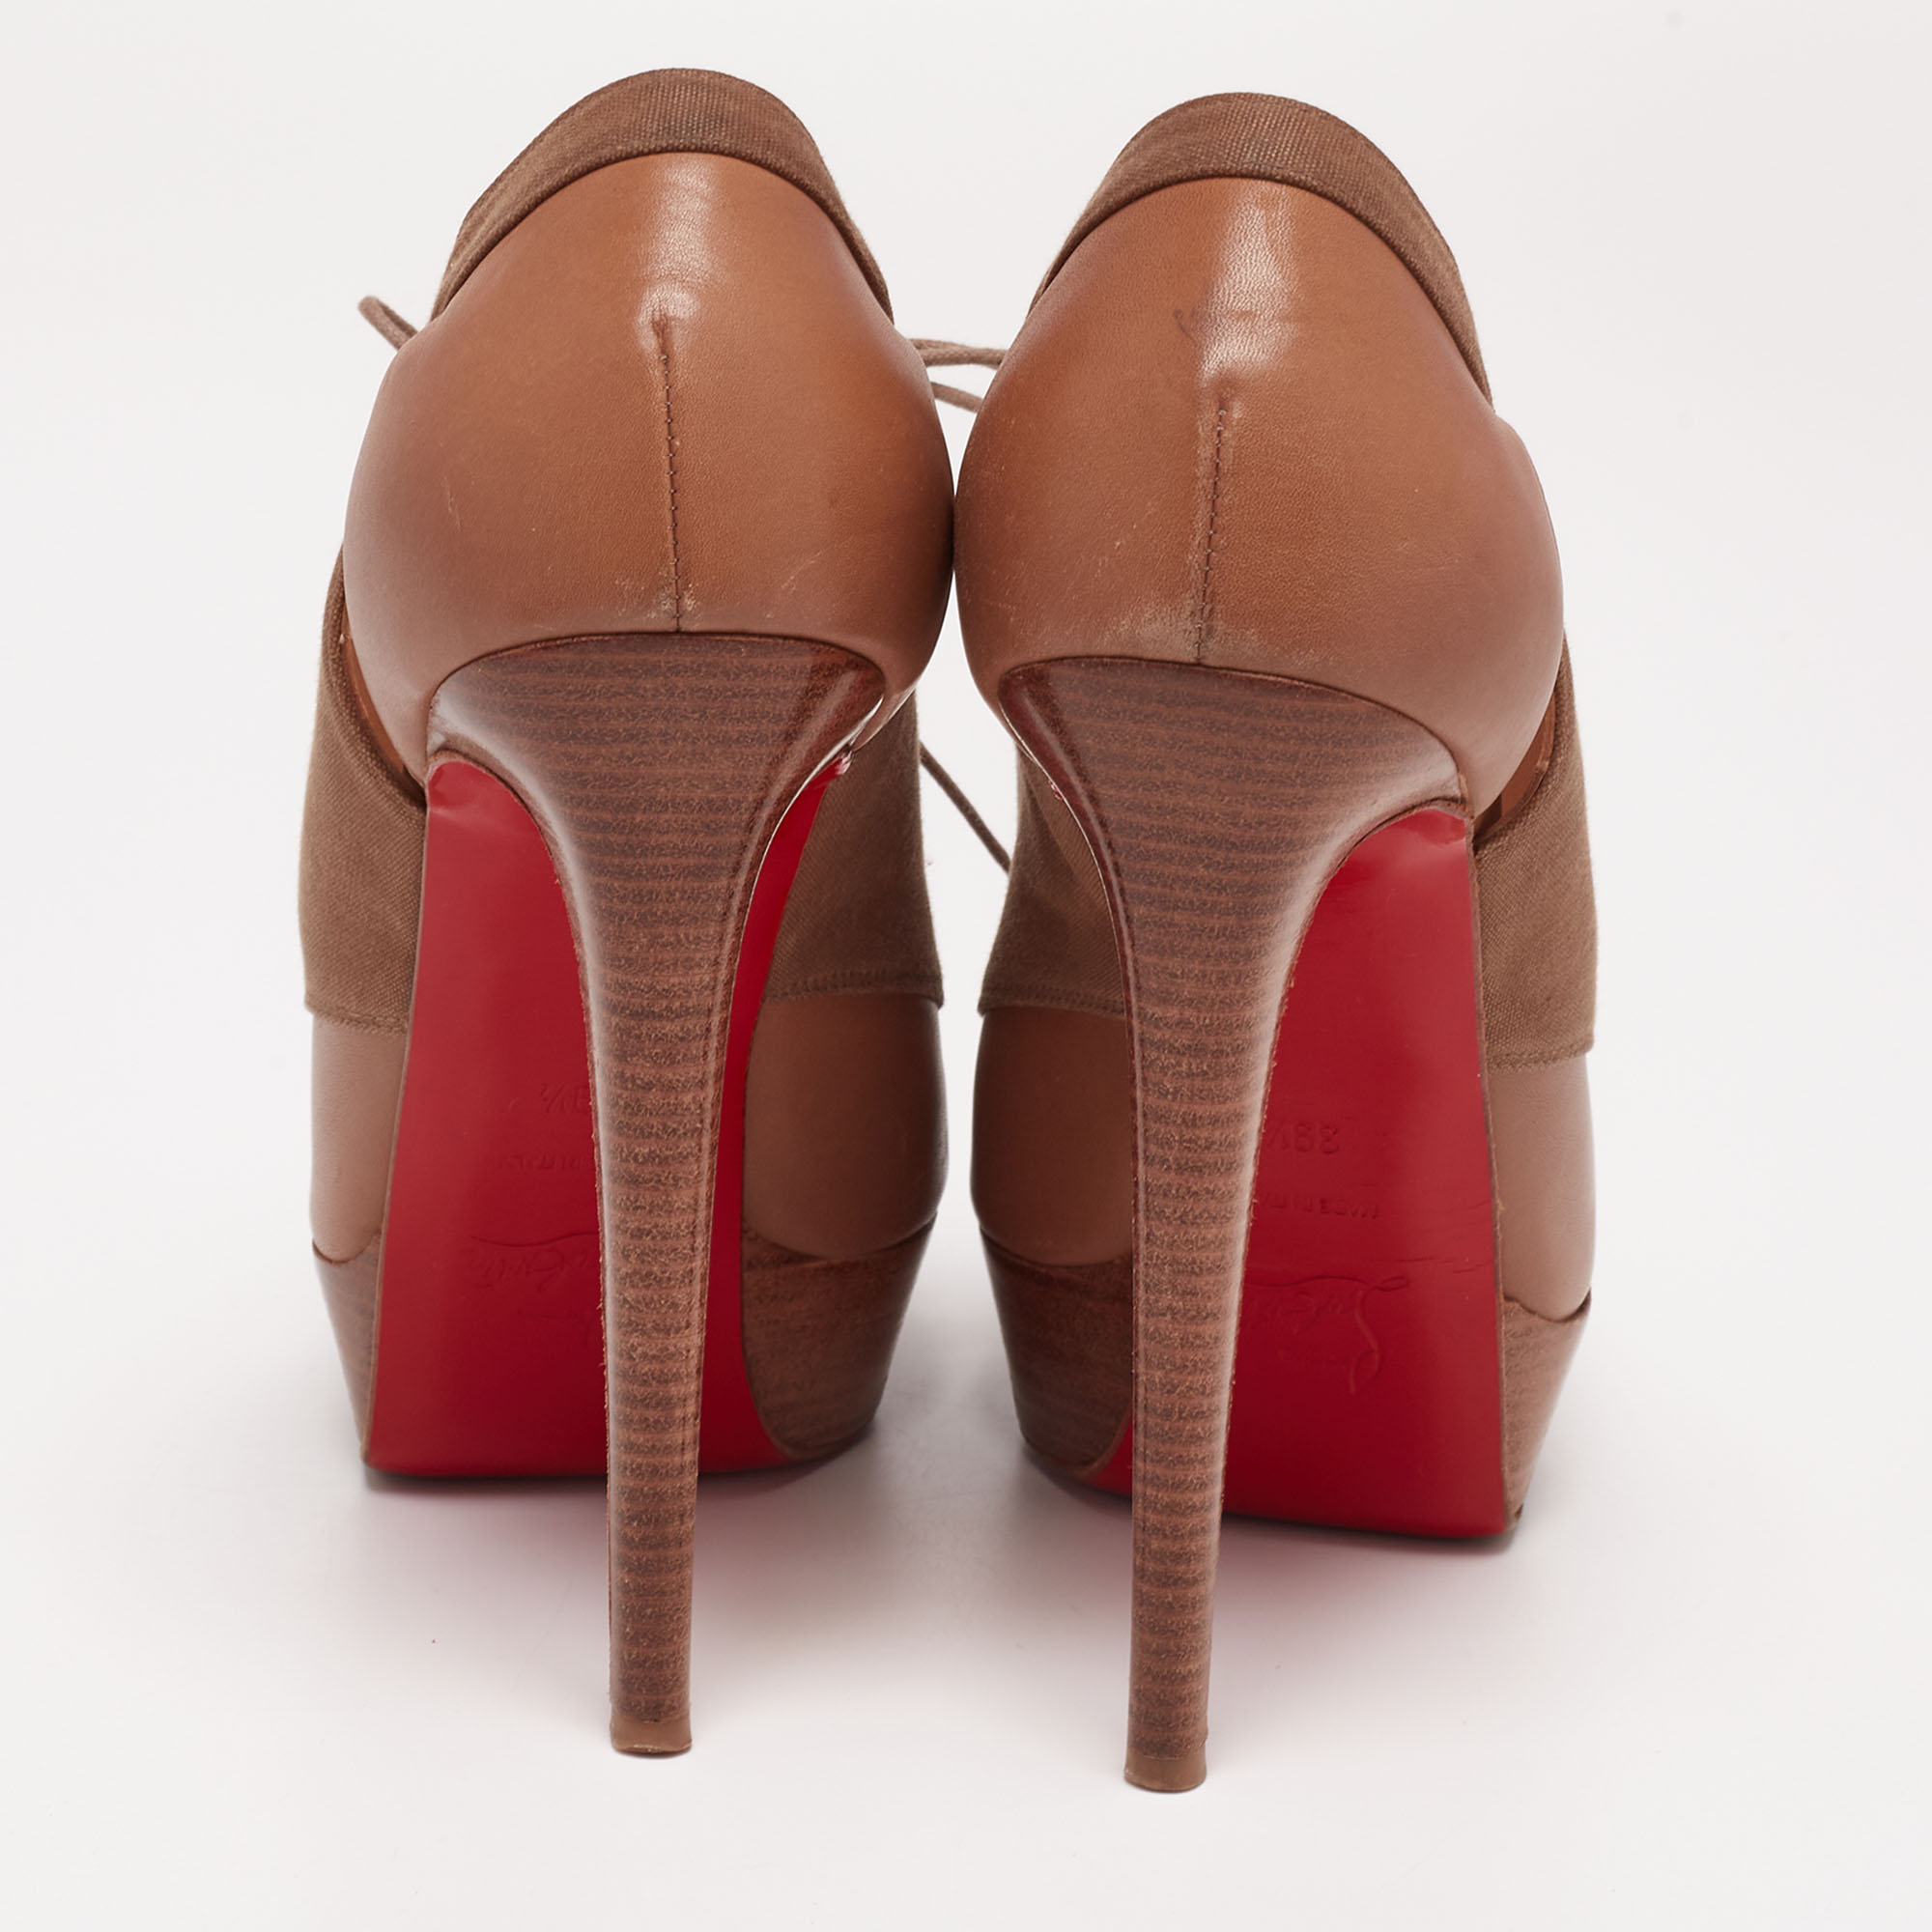 Christian Louboutin Tan/Brown Leather And Canvas Lace-Up Ankle Booties Size 39.5